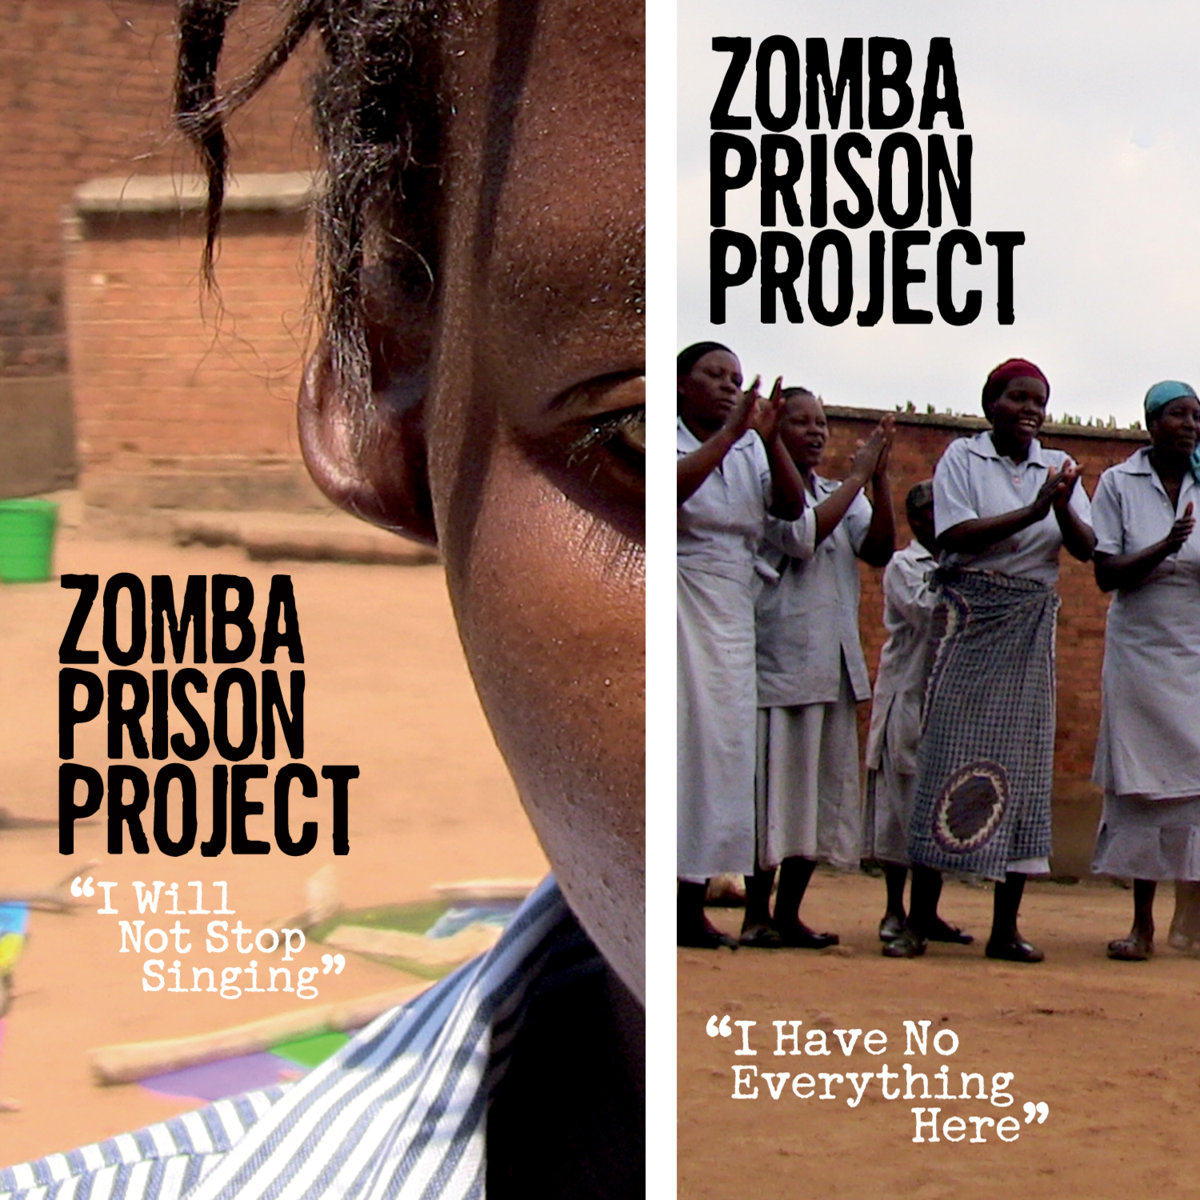 Where can I donate to or buy Zomba Prison Project?